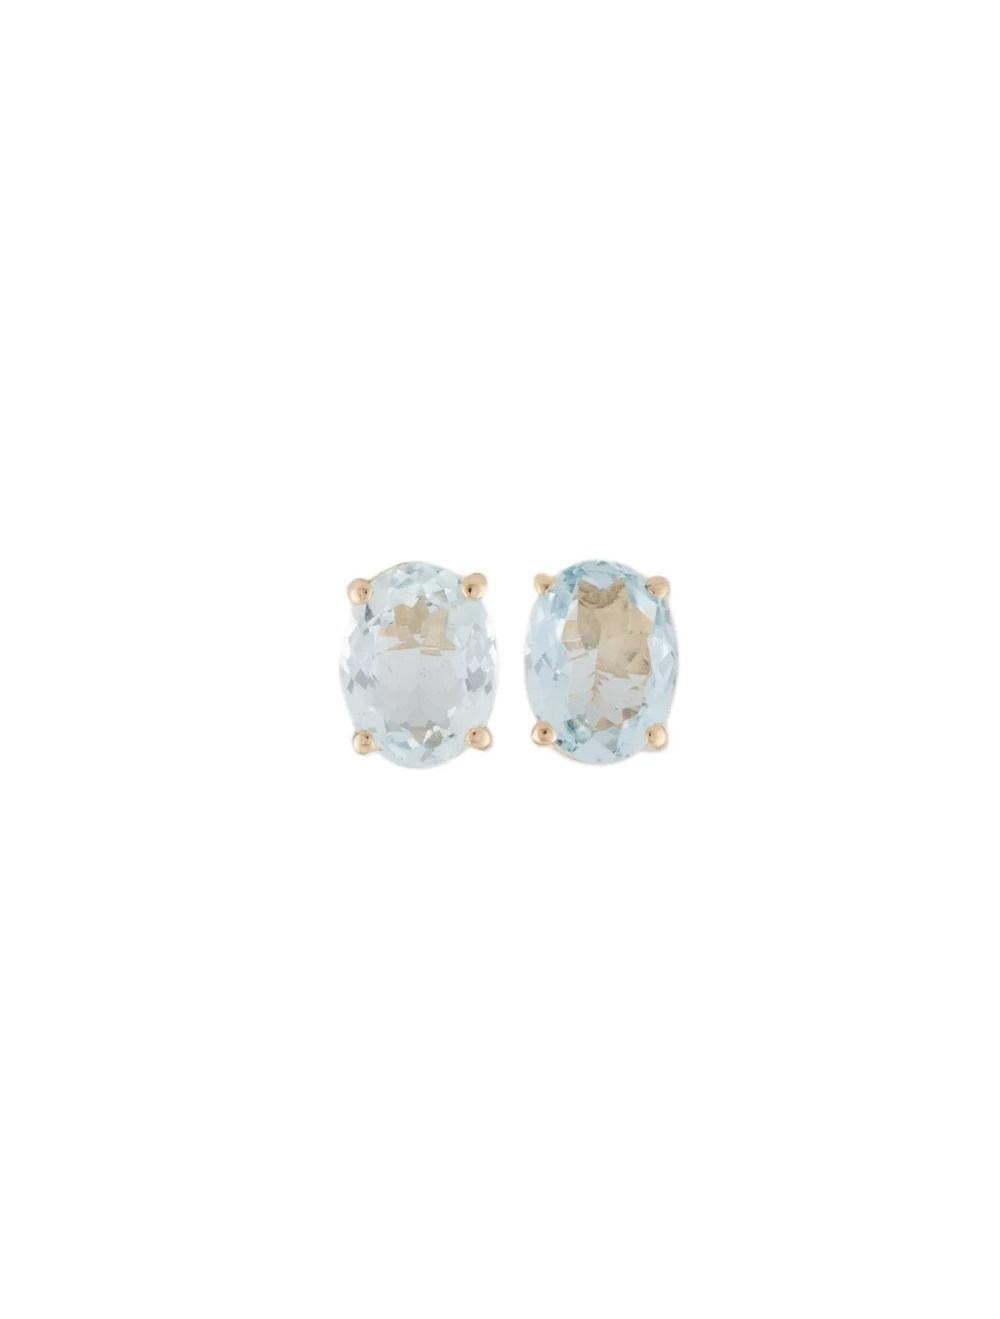 14K Aquamarine Stud Earrings - Elegant Blue Gemstones, Timeless Design, Luxury In New Condition For Sale In Holtsville, NY